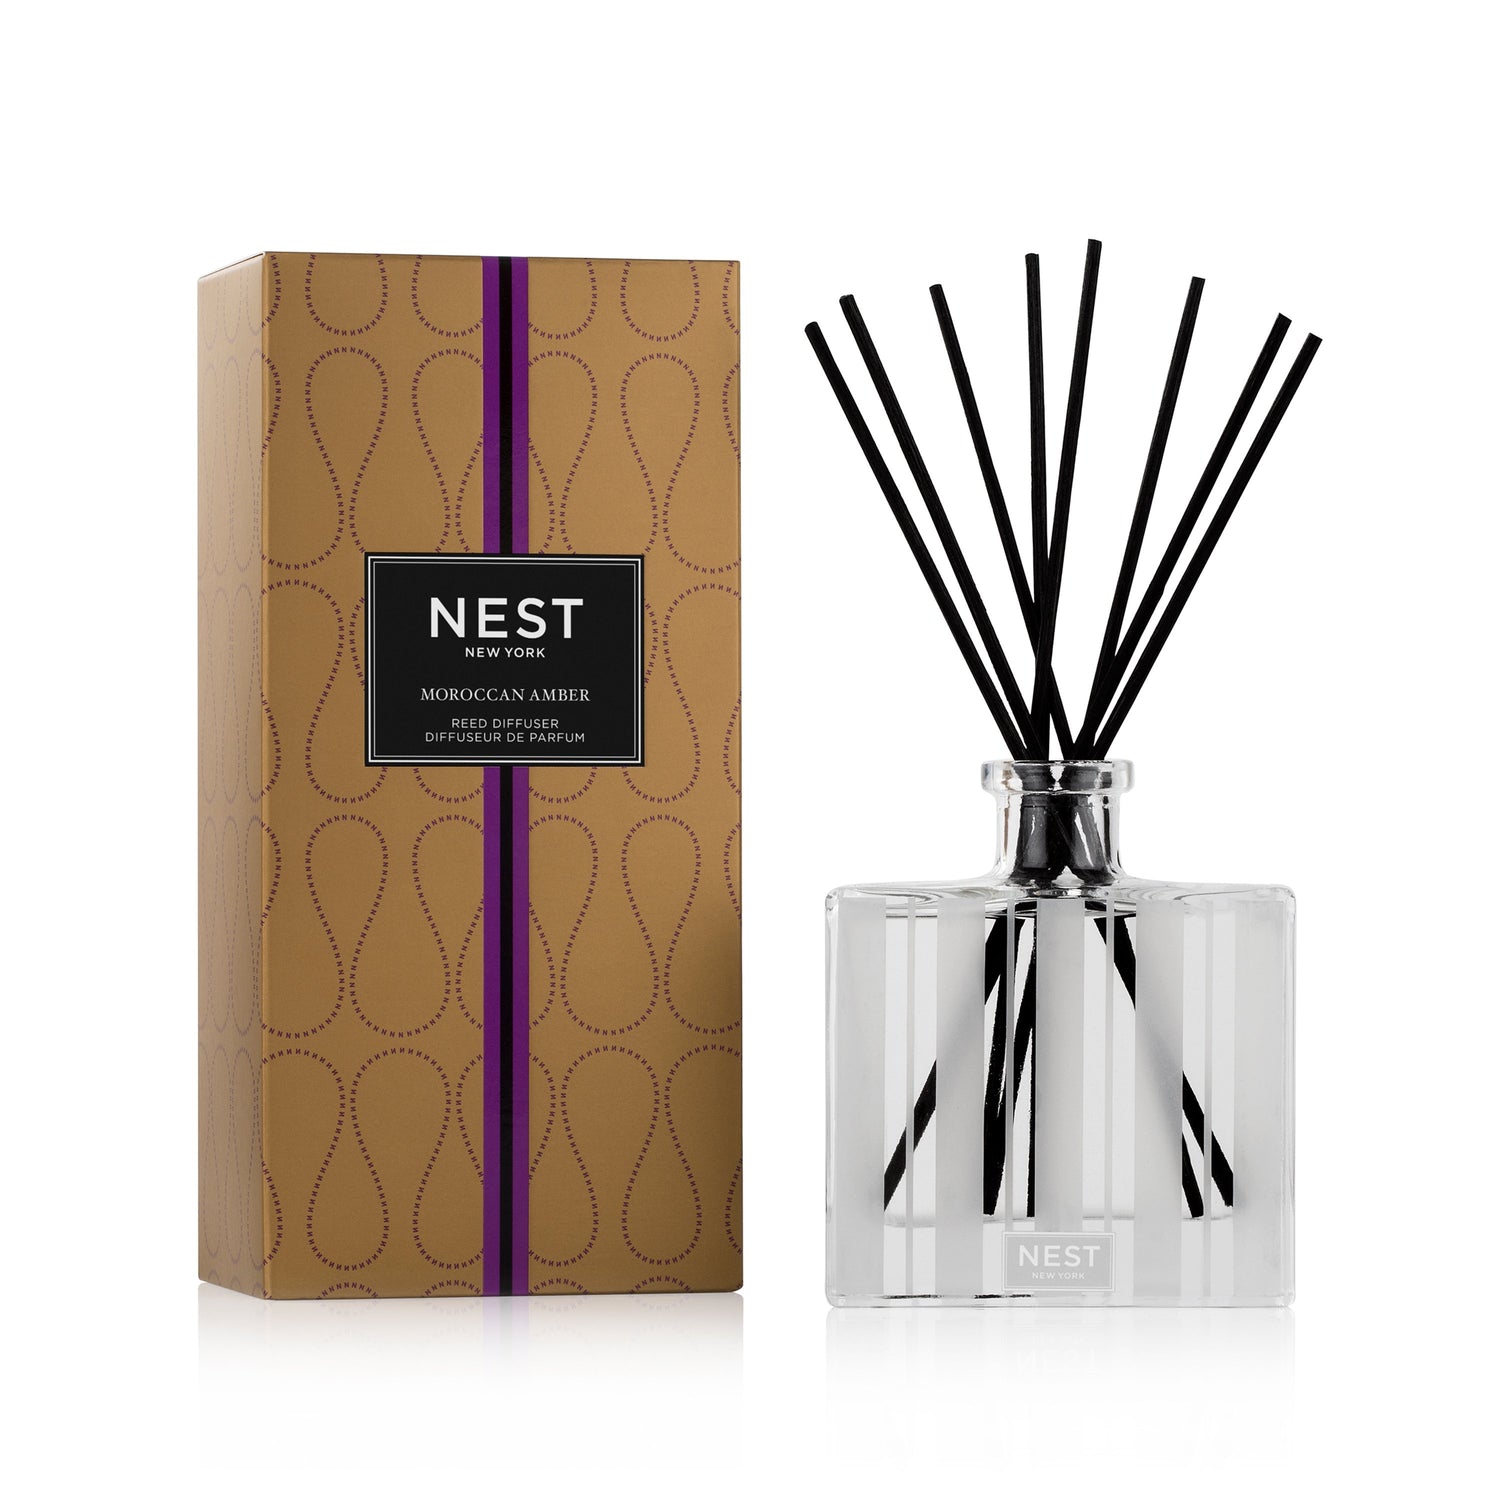 NEST Reed Diffuser - Multiple Options